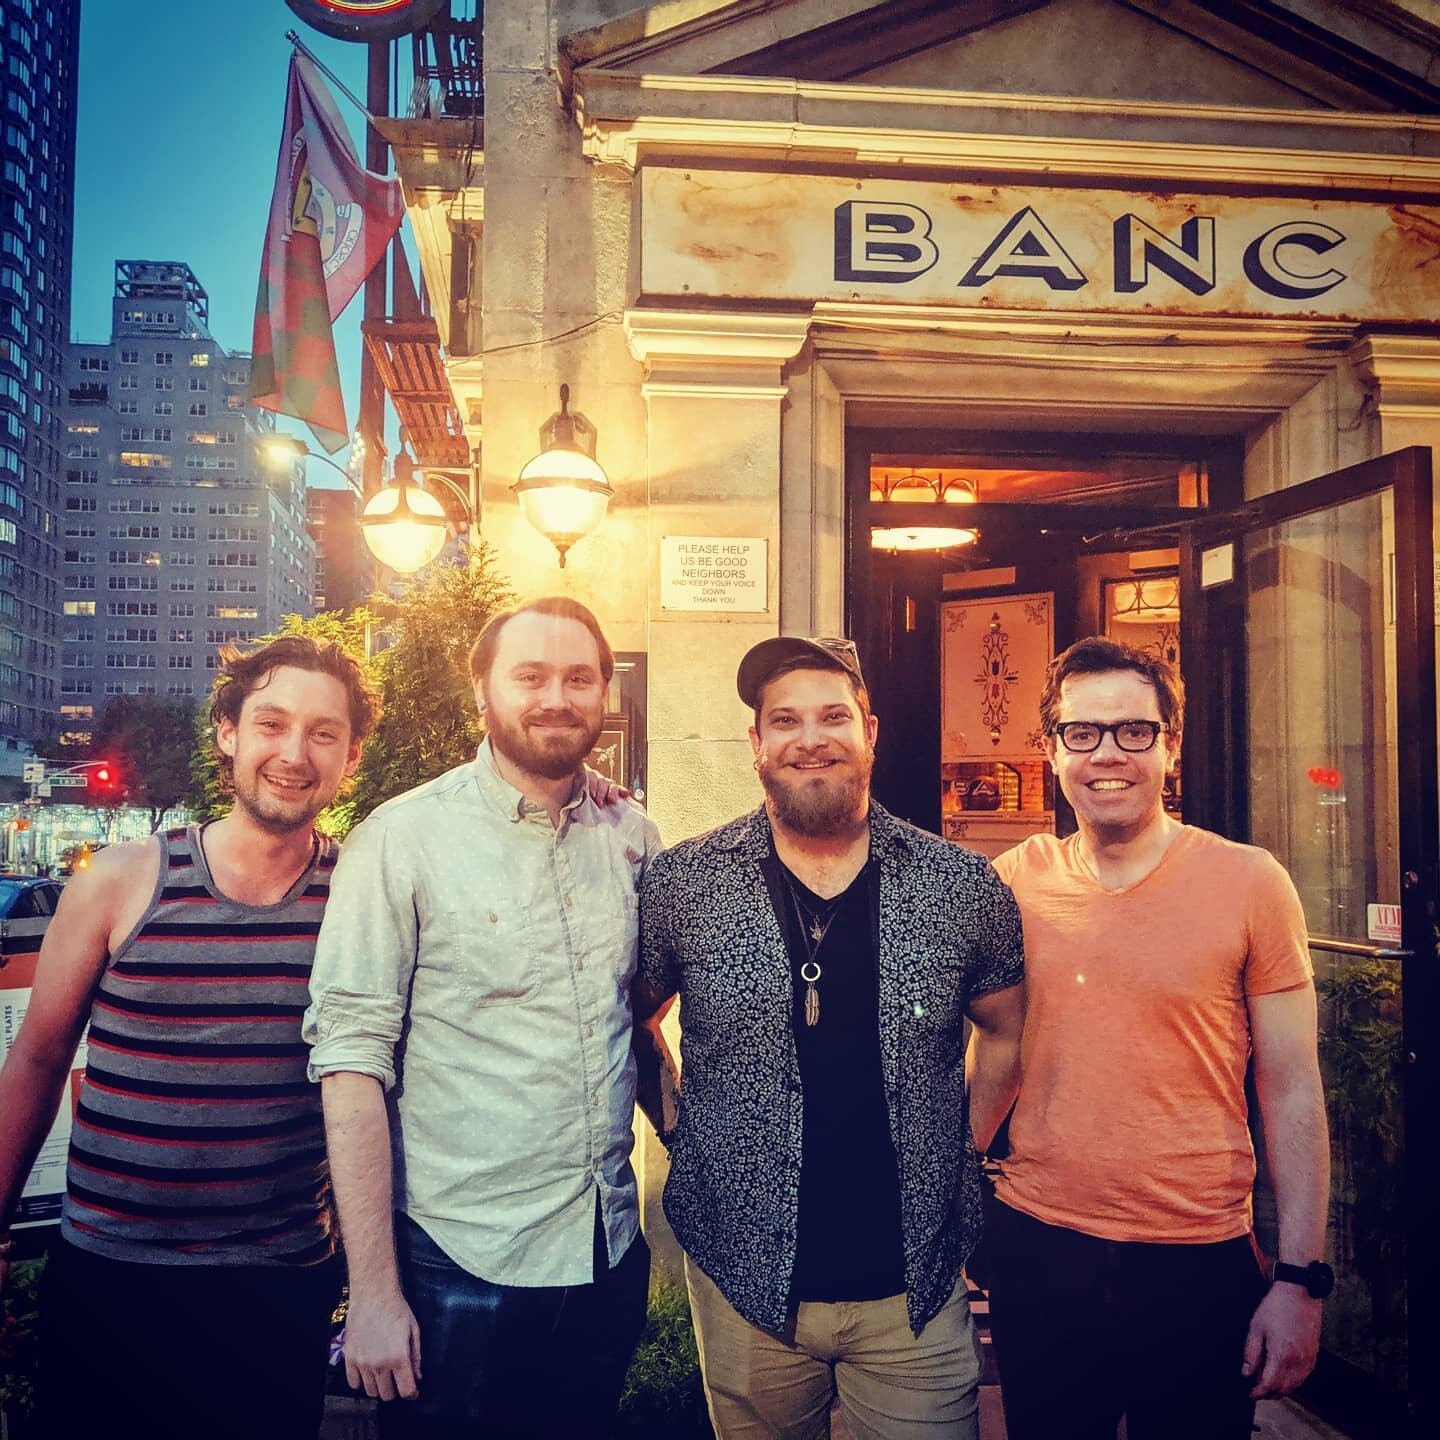 Music in the city is back! Catch us at @bancnyc next Sunday, June 13th. Music starts at 9!

#raisedbytigers #banccafe #music #livemusic #nyclivemusic